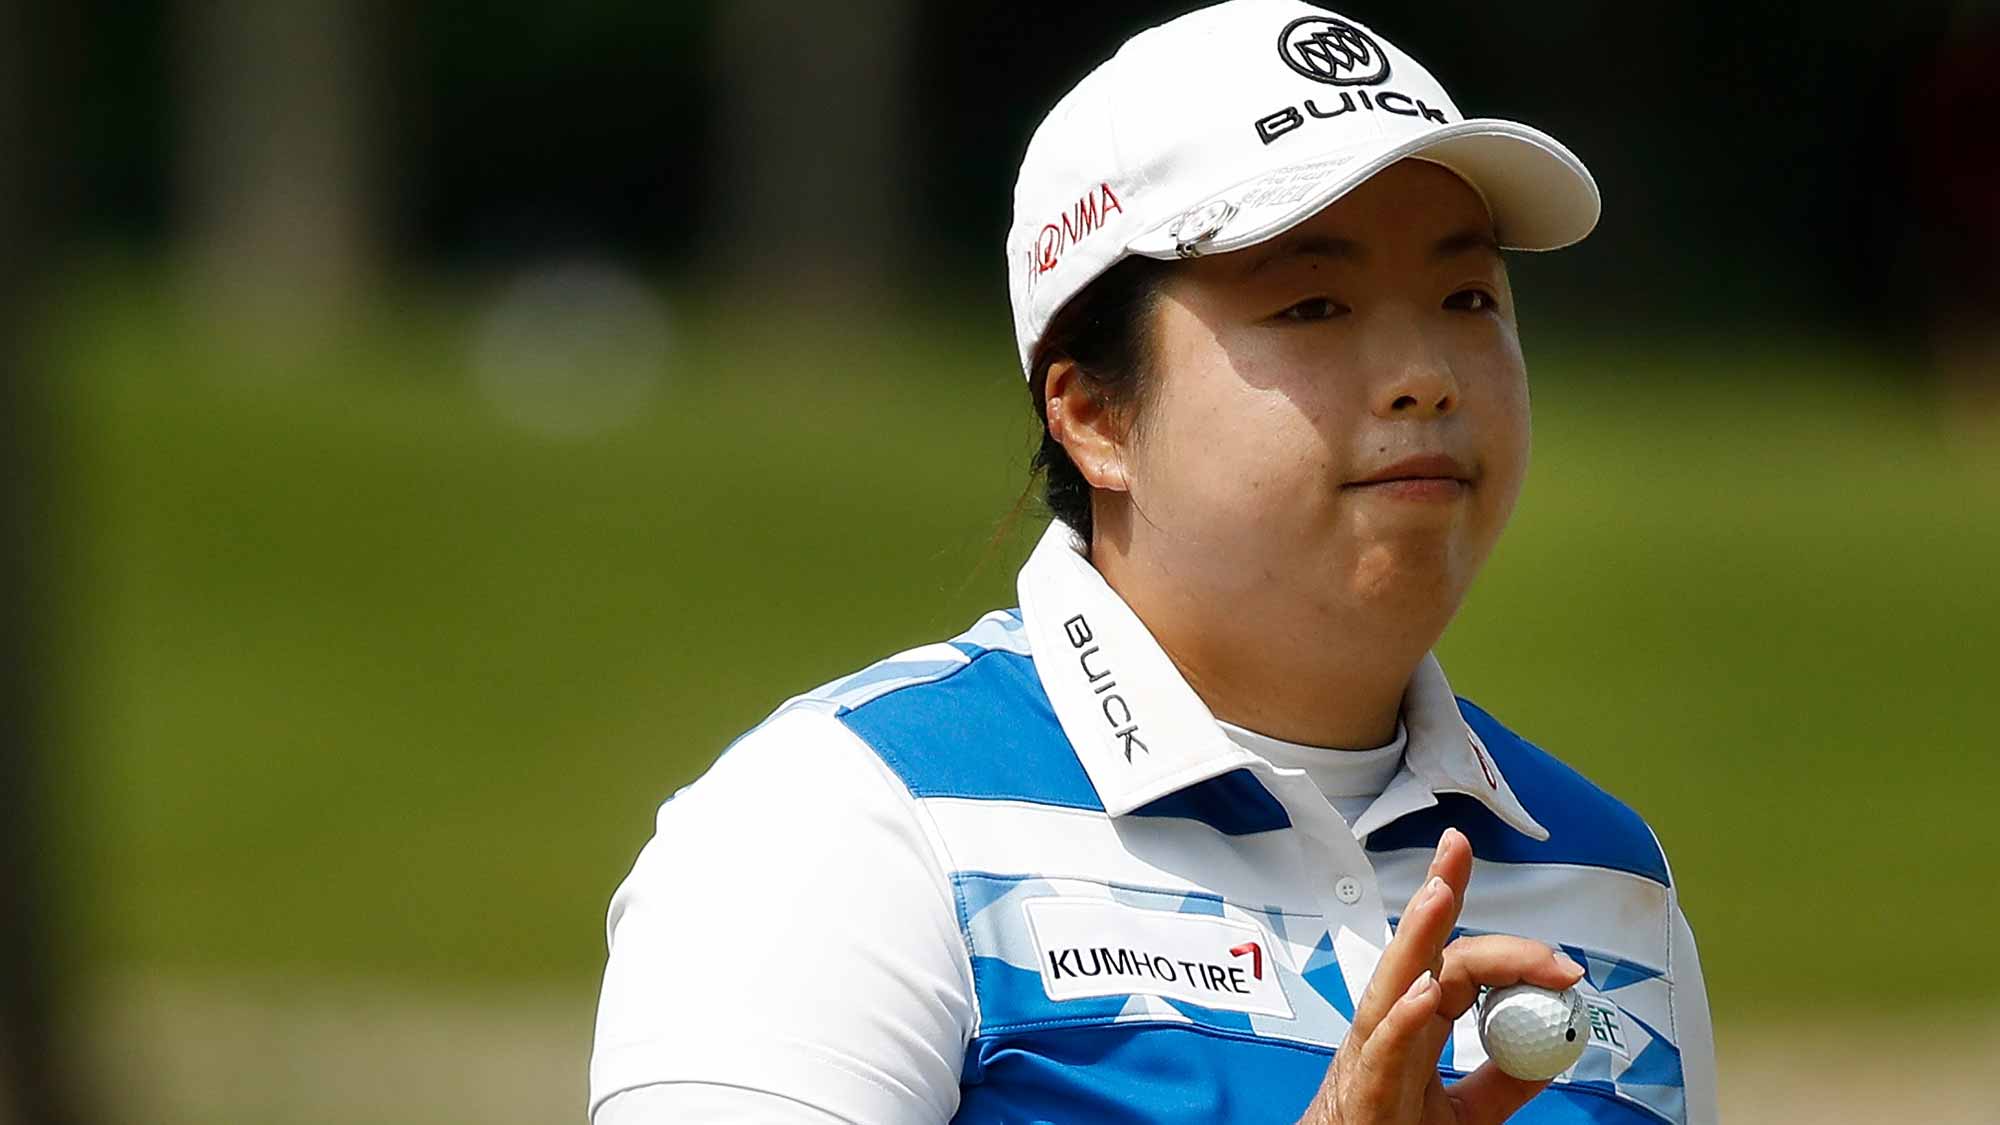 Shanshan Feng of China waves to fans after a par on the seventh hole during the final round of the LPGA Volvik Championship on May 28, 2017 at Travis Pointe Country Club Ann Arbor, Michigan